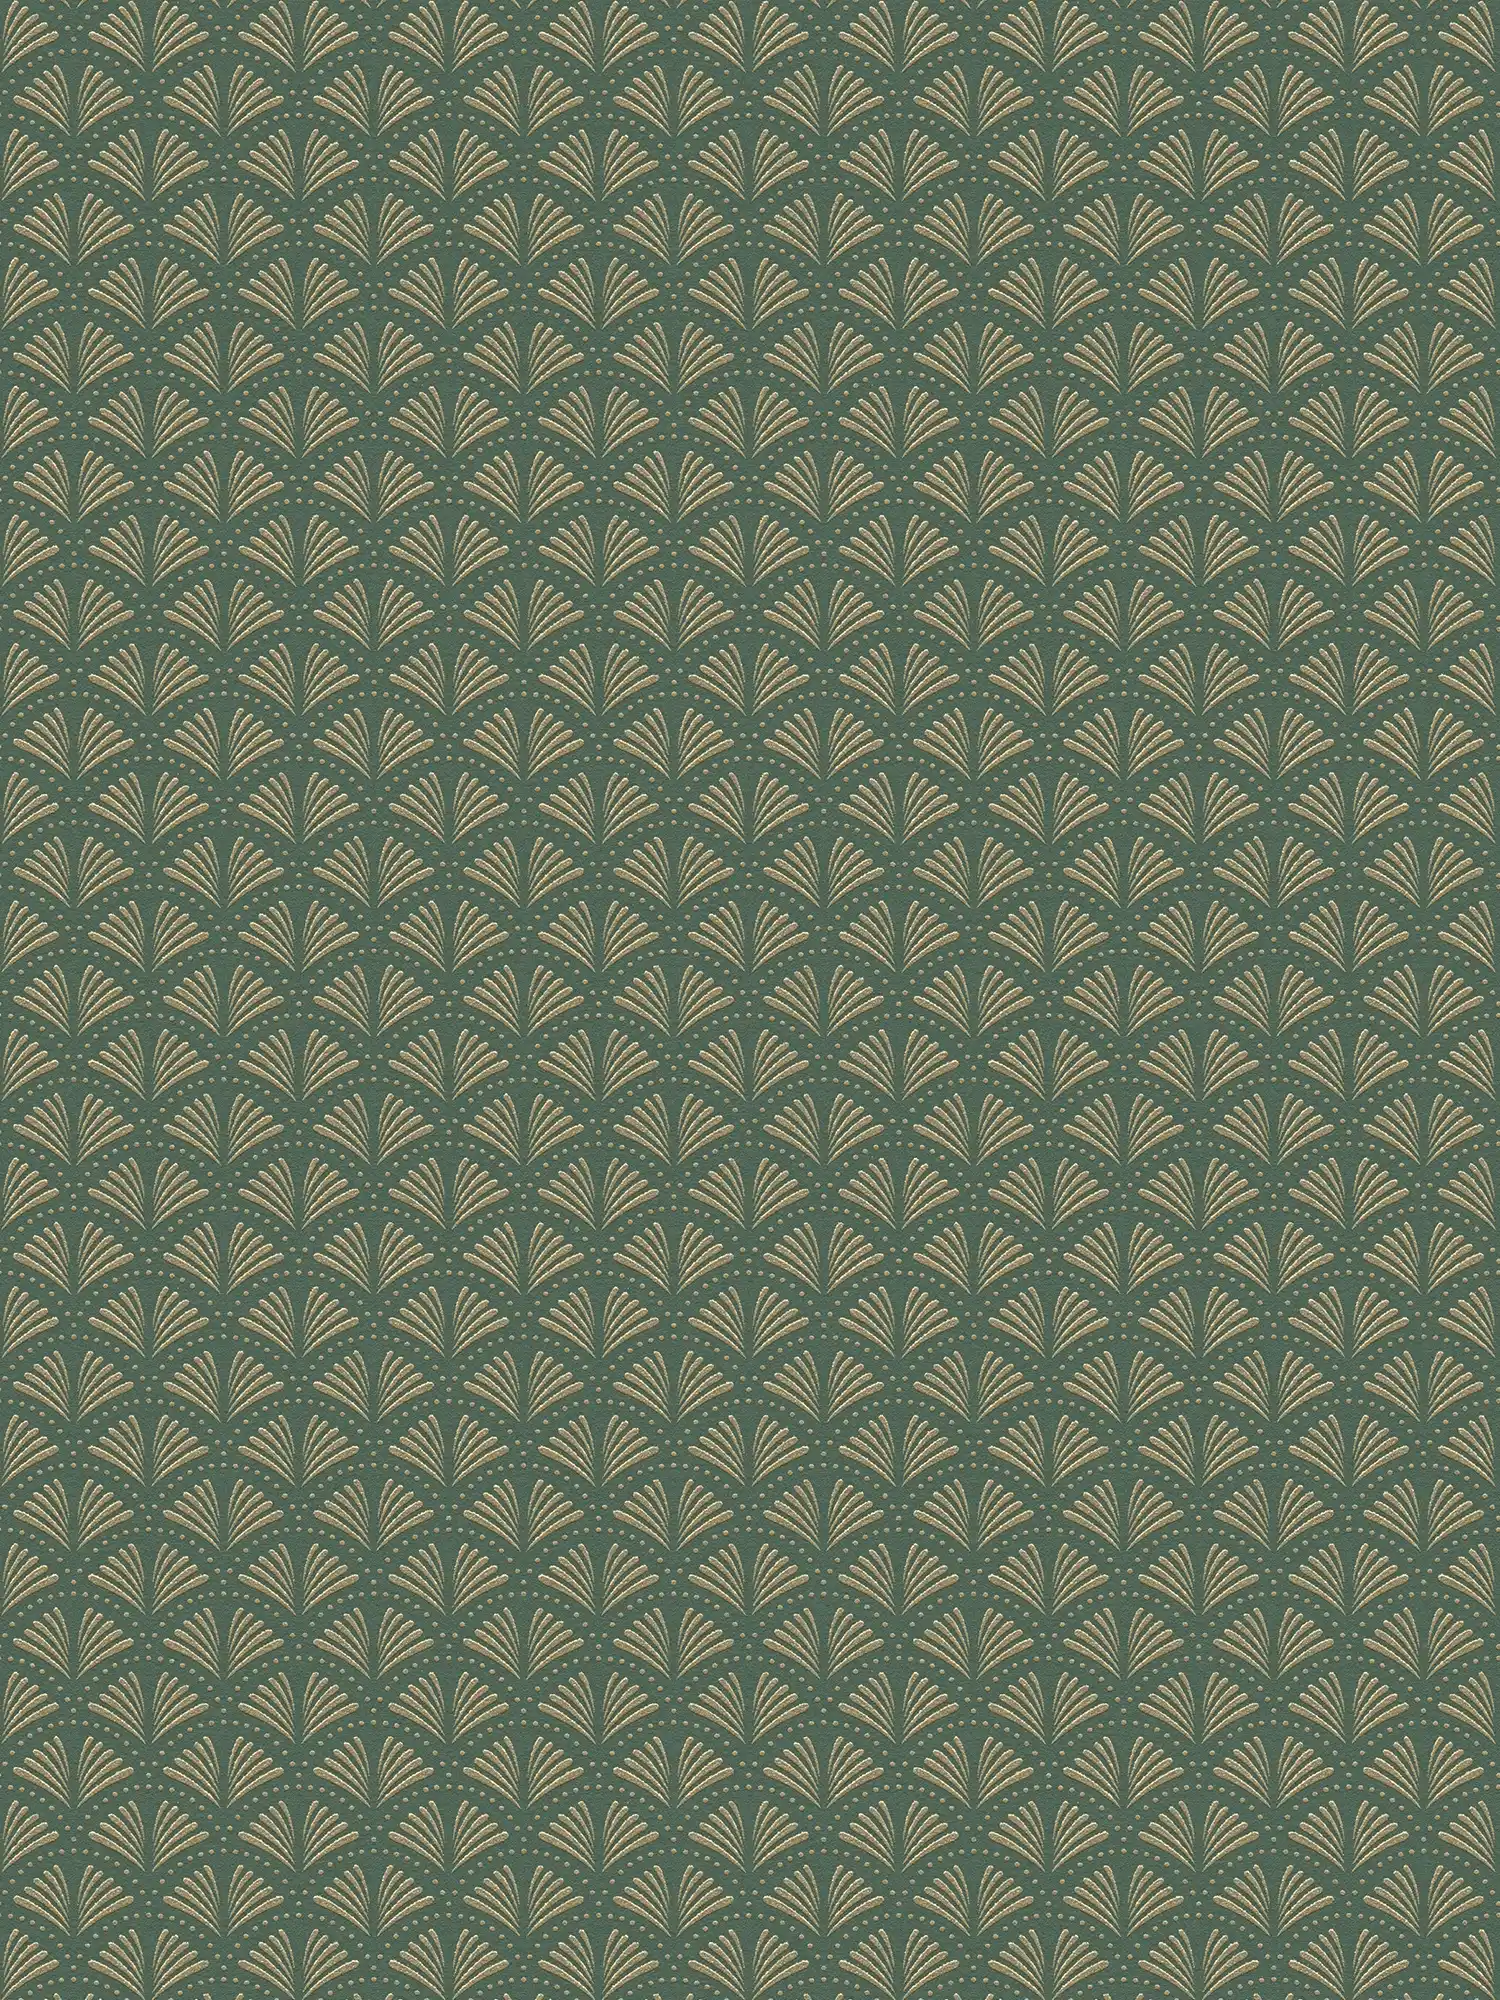 Wallpaper green & gold with Art Deco pattern and metallic effect
